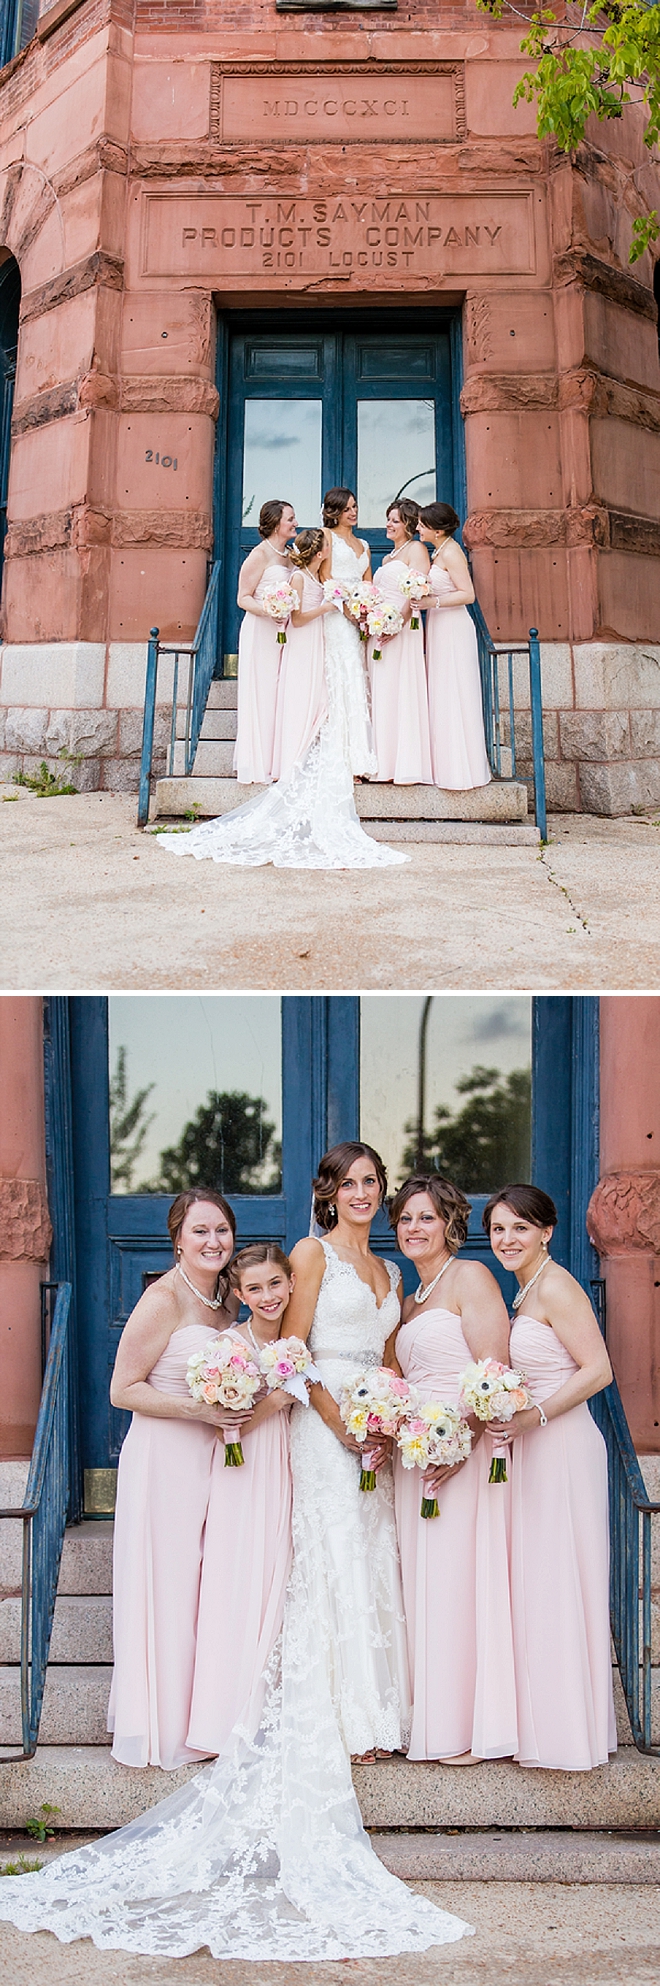 We love this gorgeous Bride and her darling Bridesmaid's before the first look!